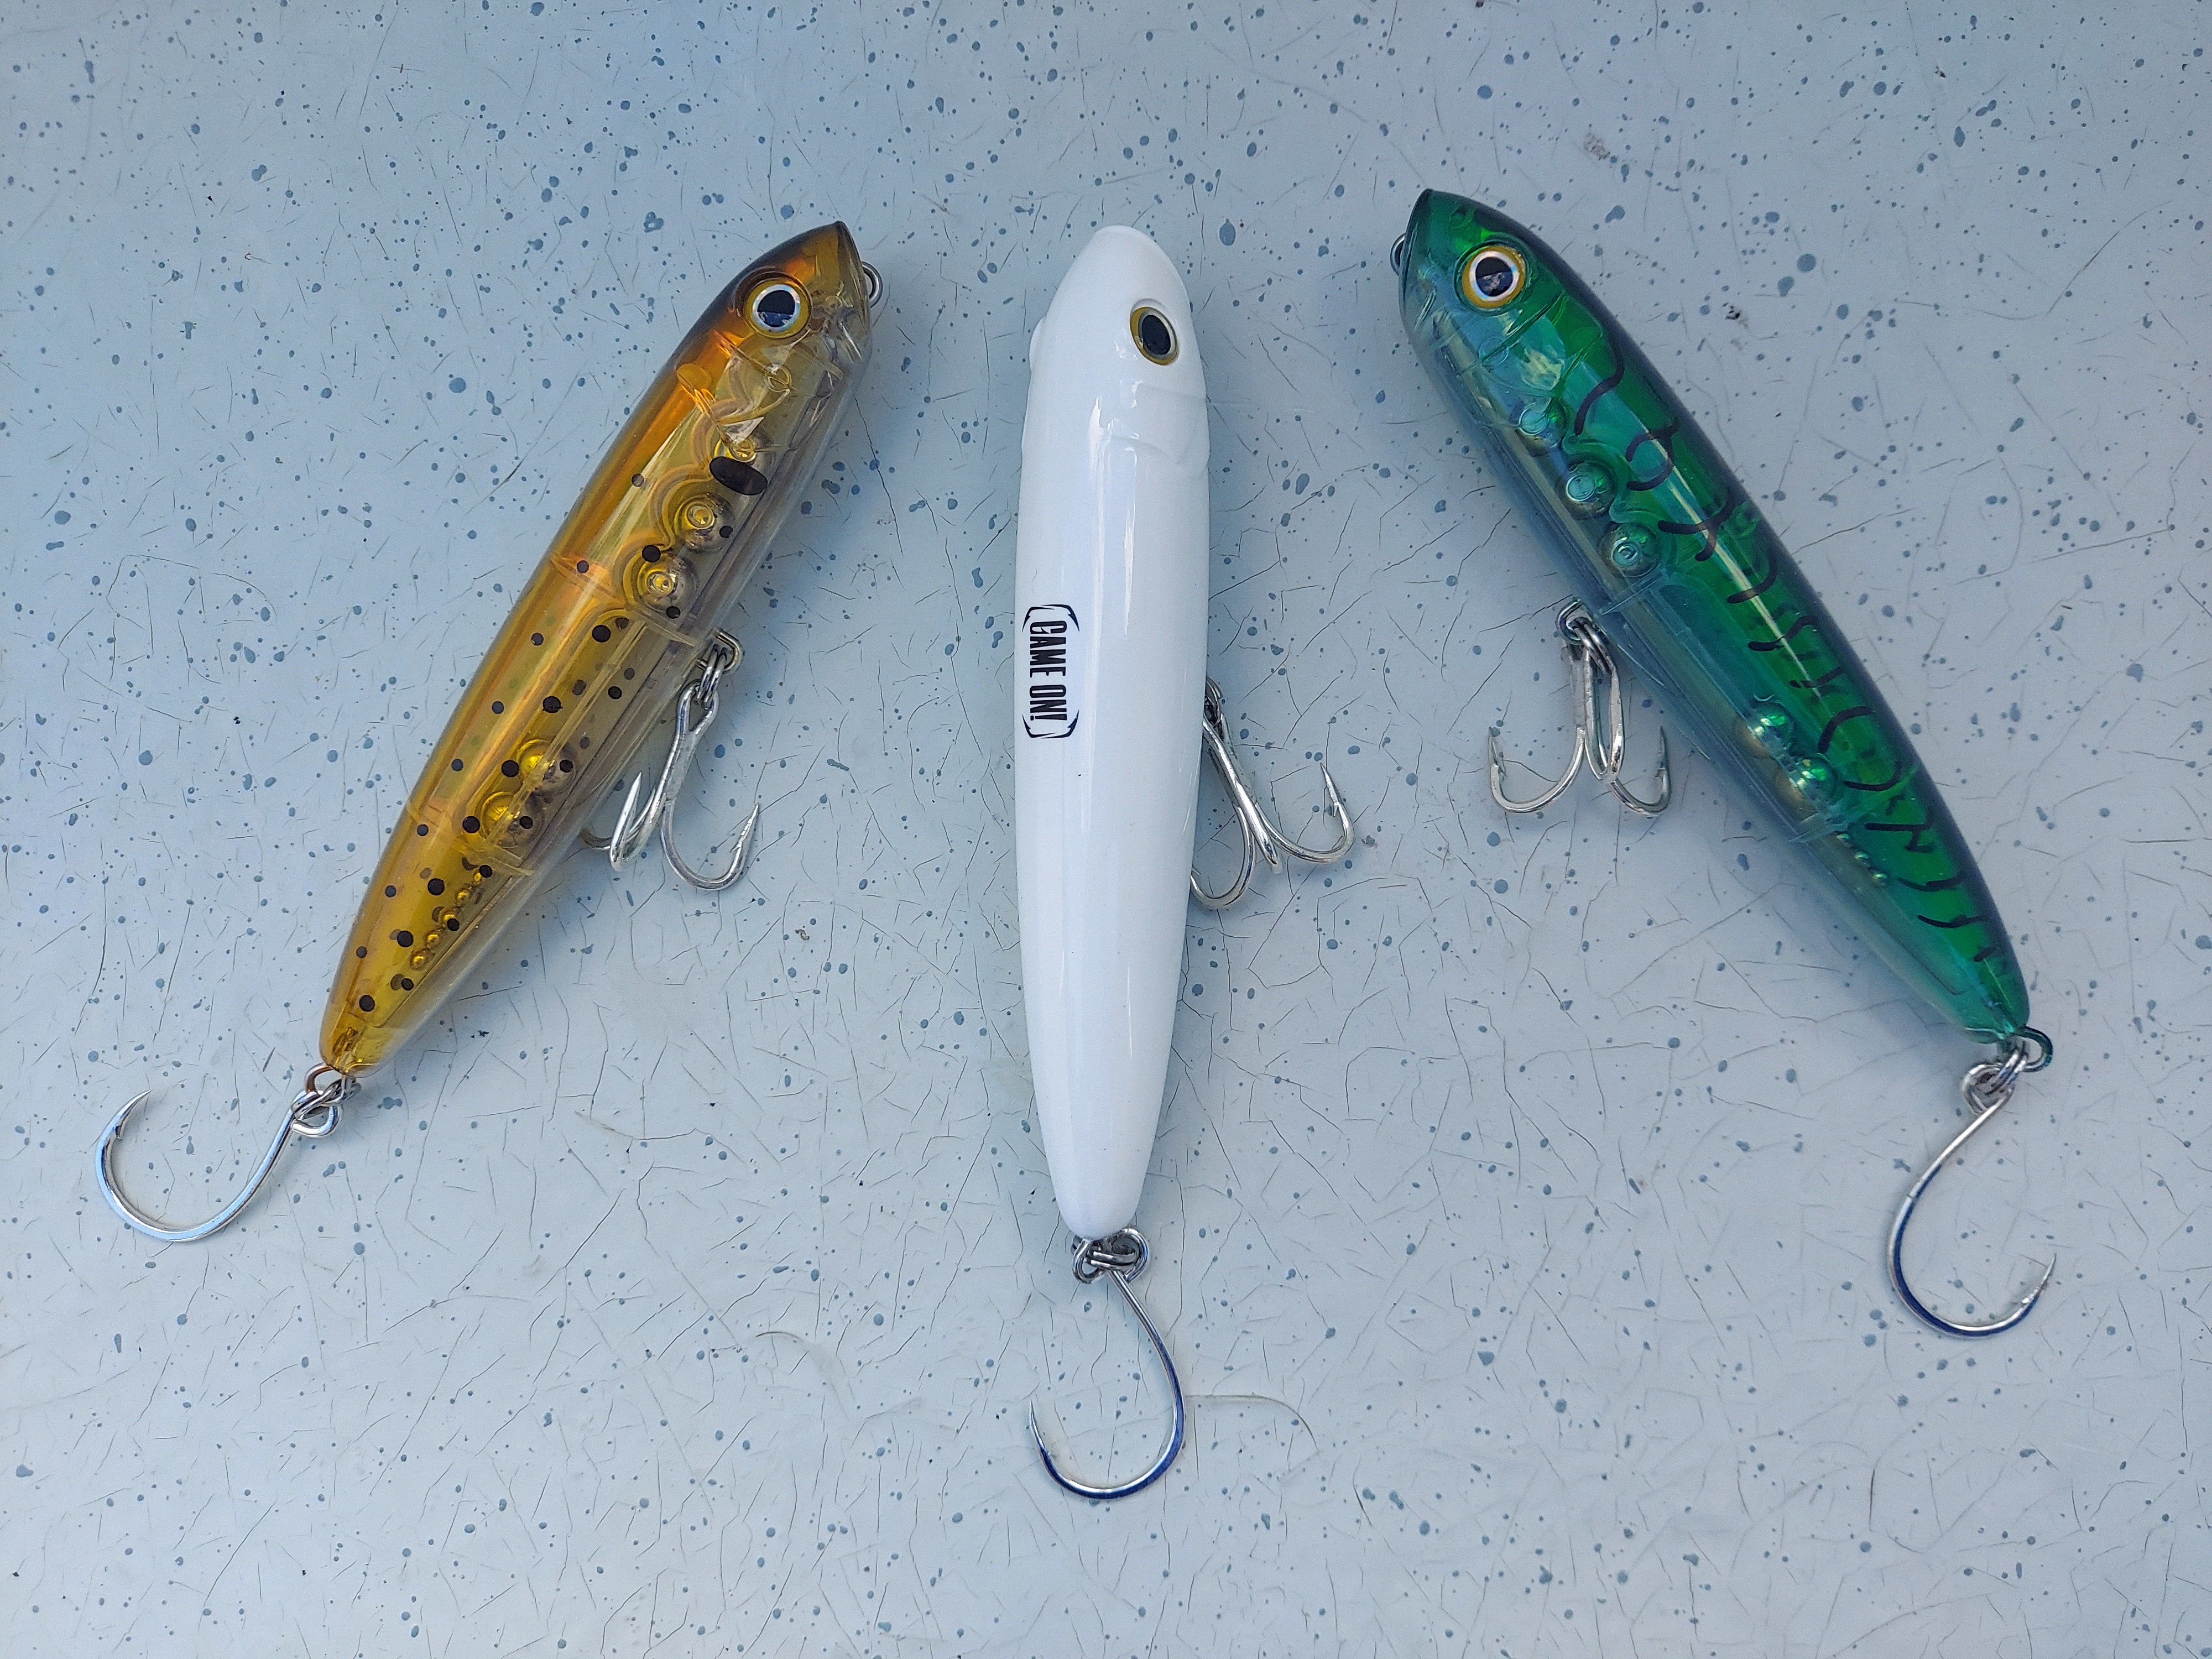 Walking the Dog - Selecting the right rod, reel, and line for walking  topwater baits